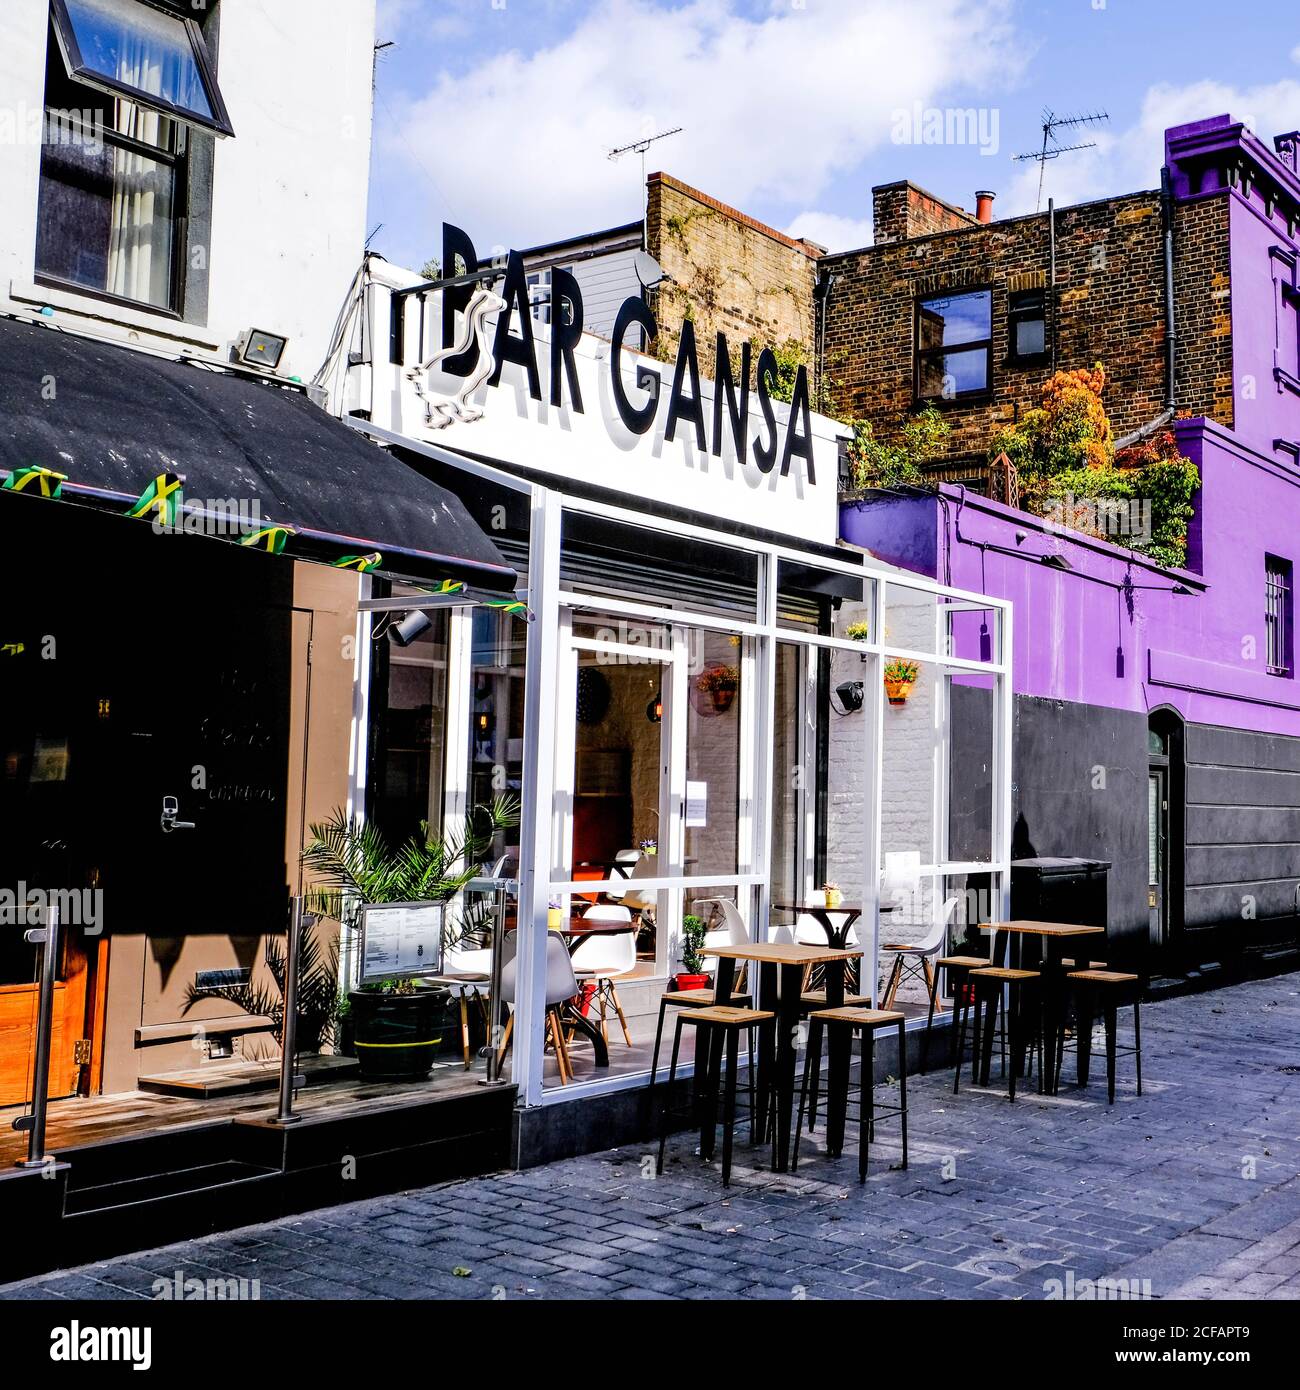 Camden Town Street Cafe And Visitor Attraction, London UK, With No People Stock Photo